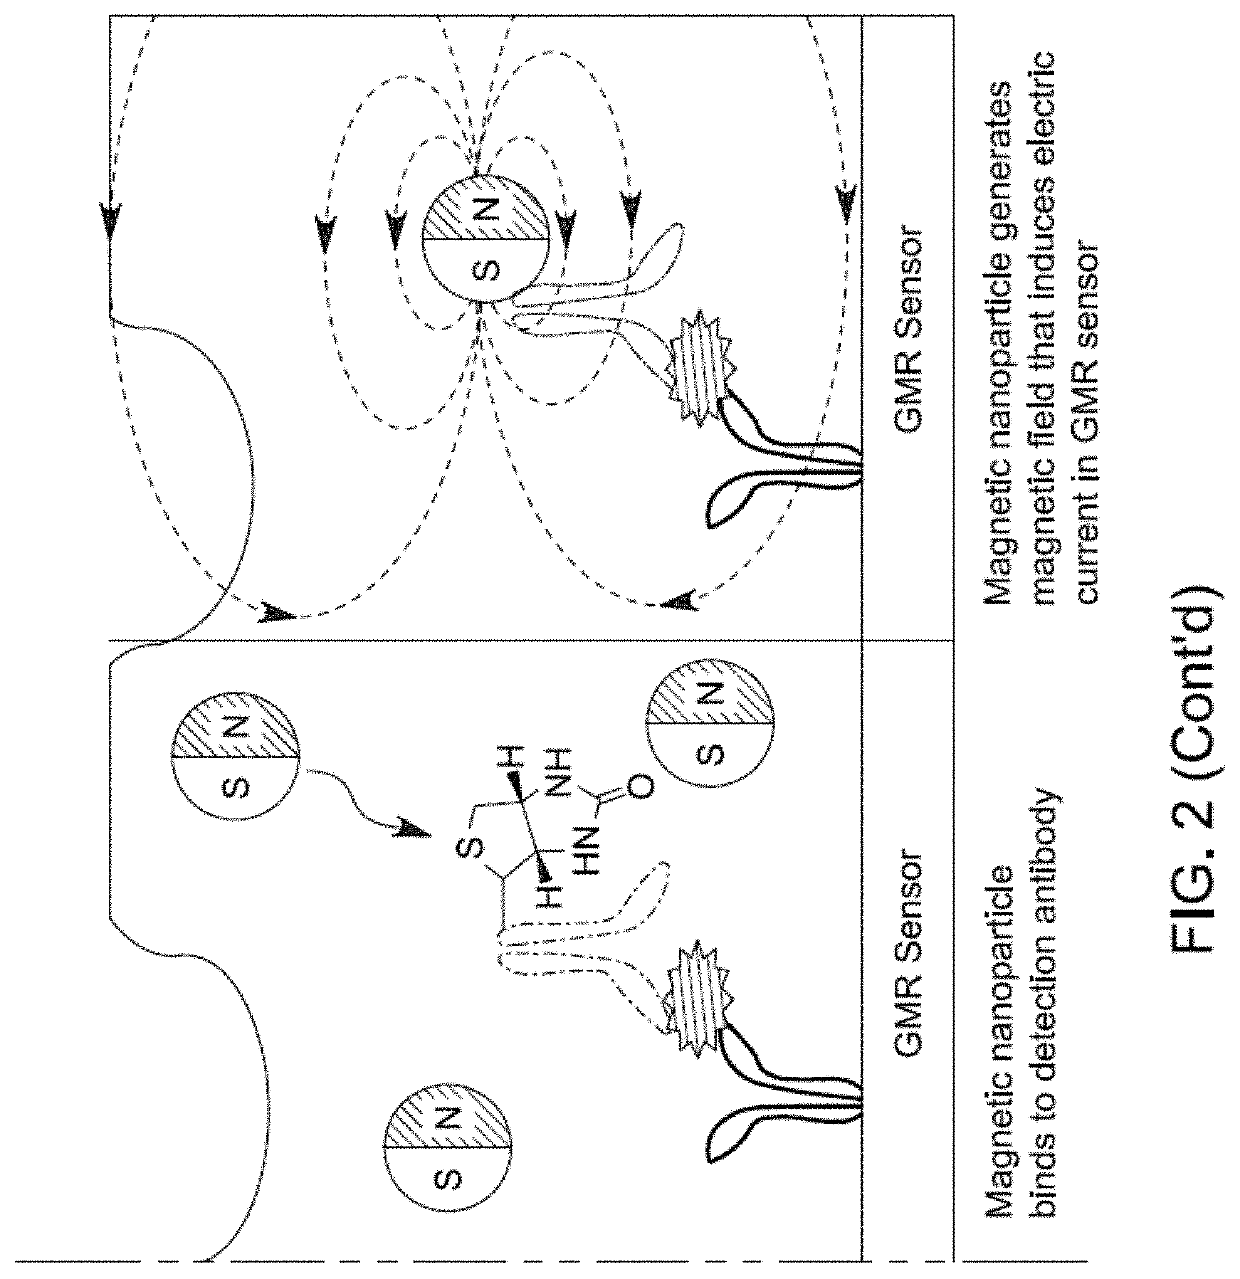 Systems and Methods for Measuring Binding Kinetics of Analytes in Complex Solutions